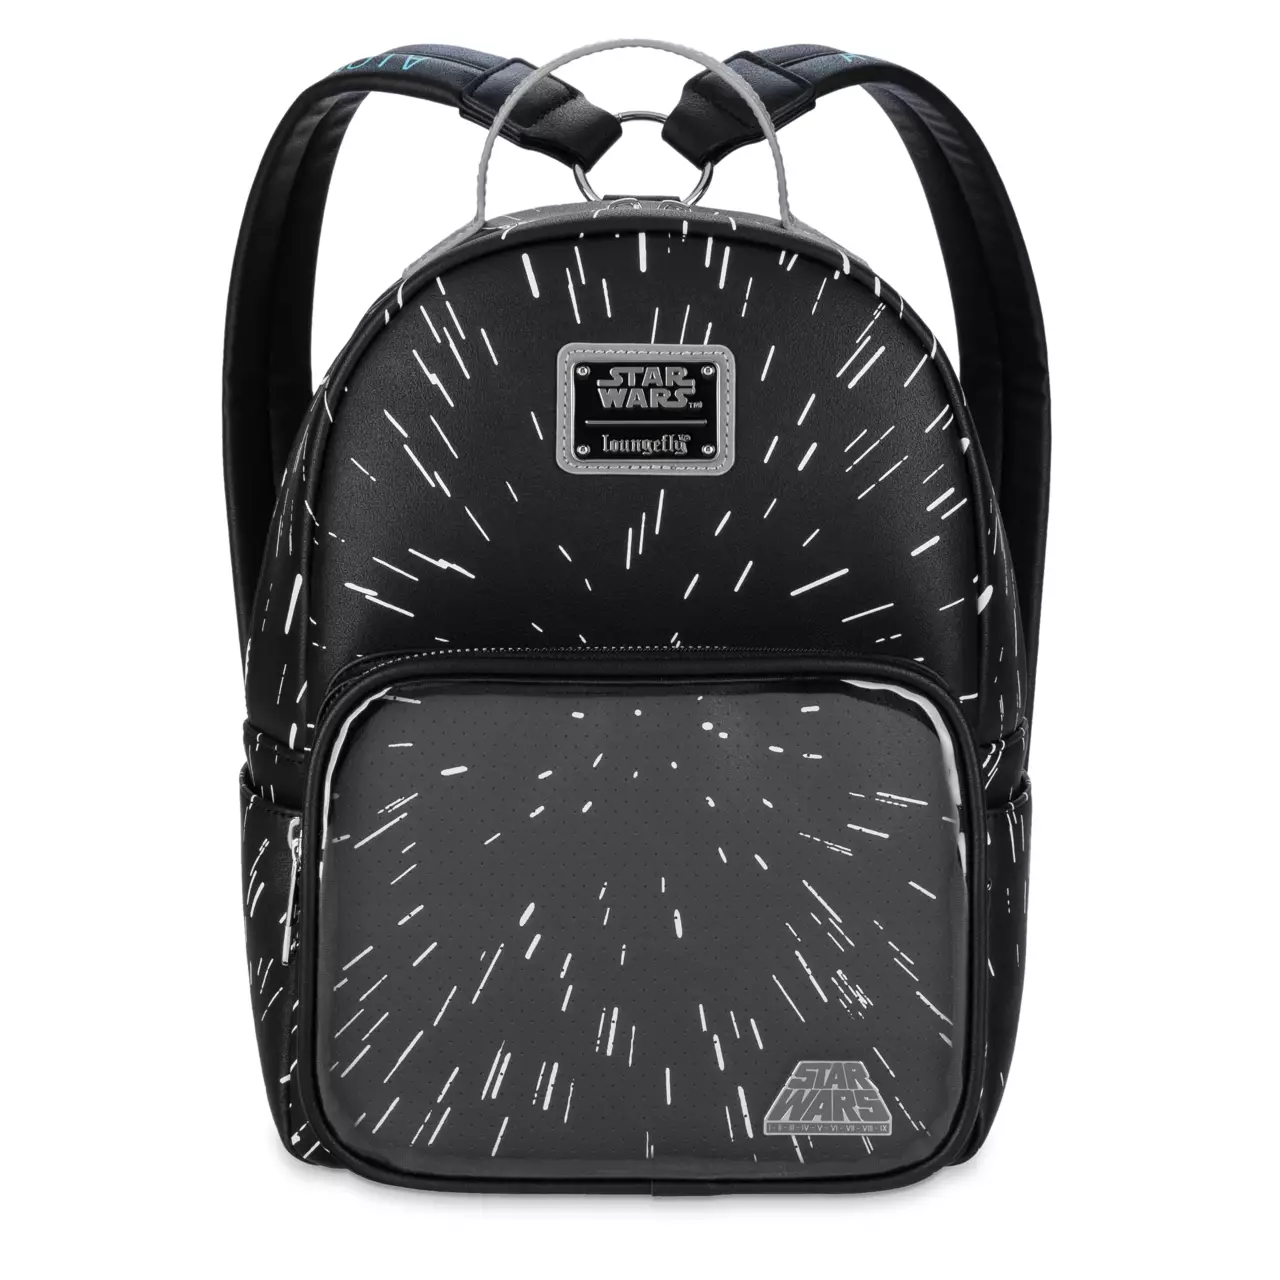 Star Wars A New Hope Loungefly Backpack